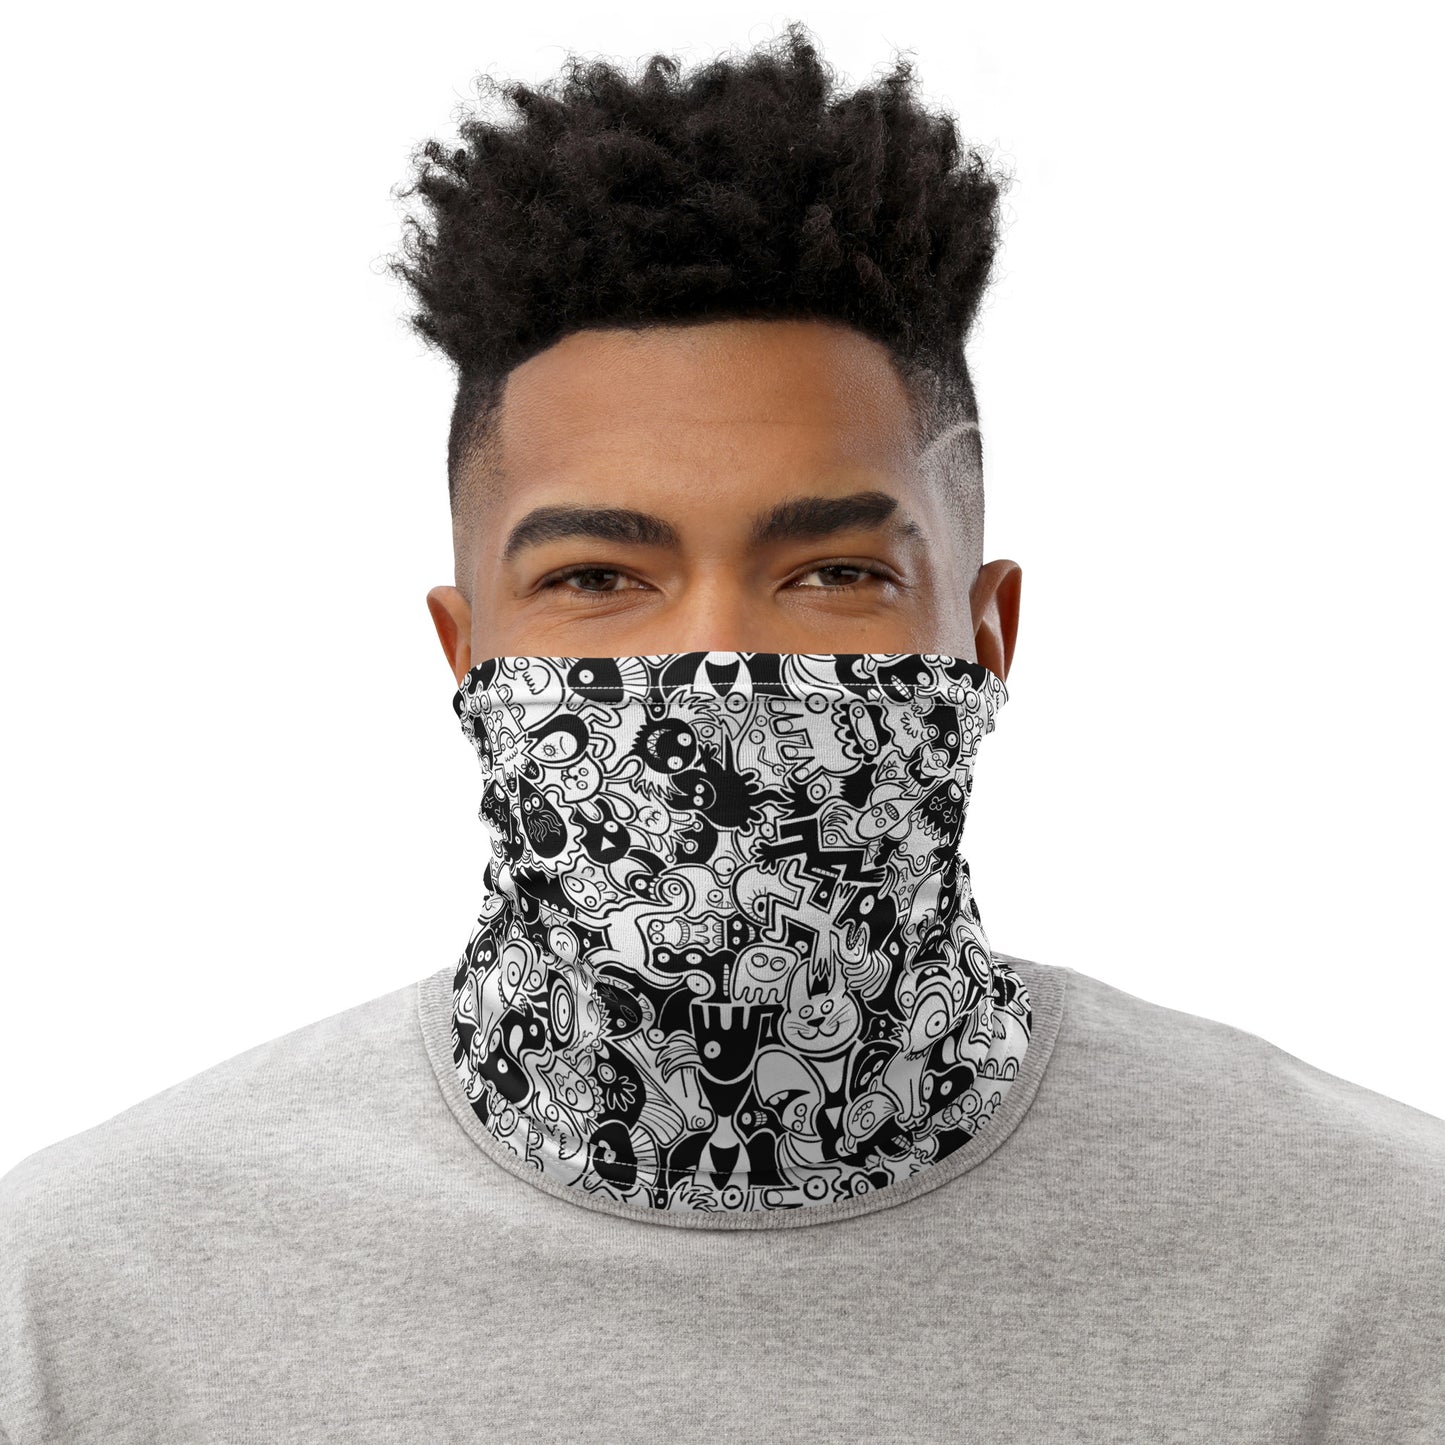 Smiling man wearing Neck Gaiter All-over printed with Joyful crowd of black and white doodle creatures. Neck warmer